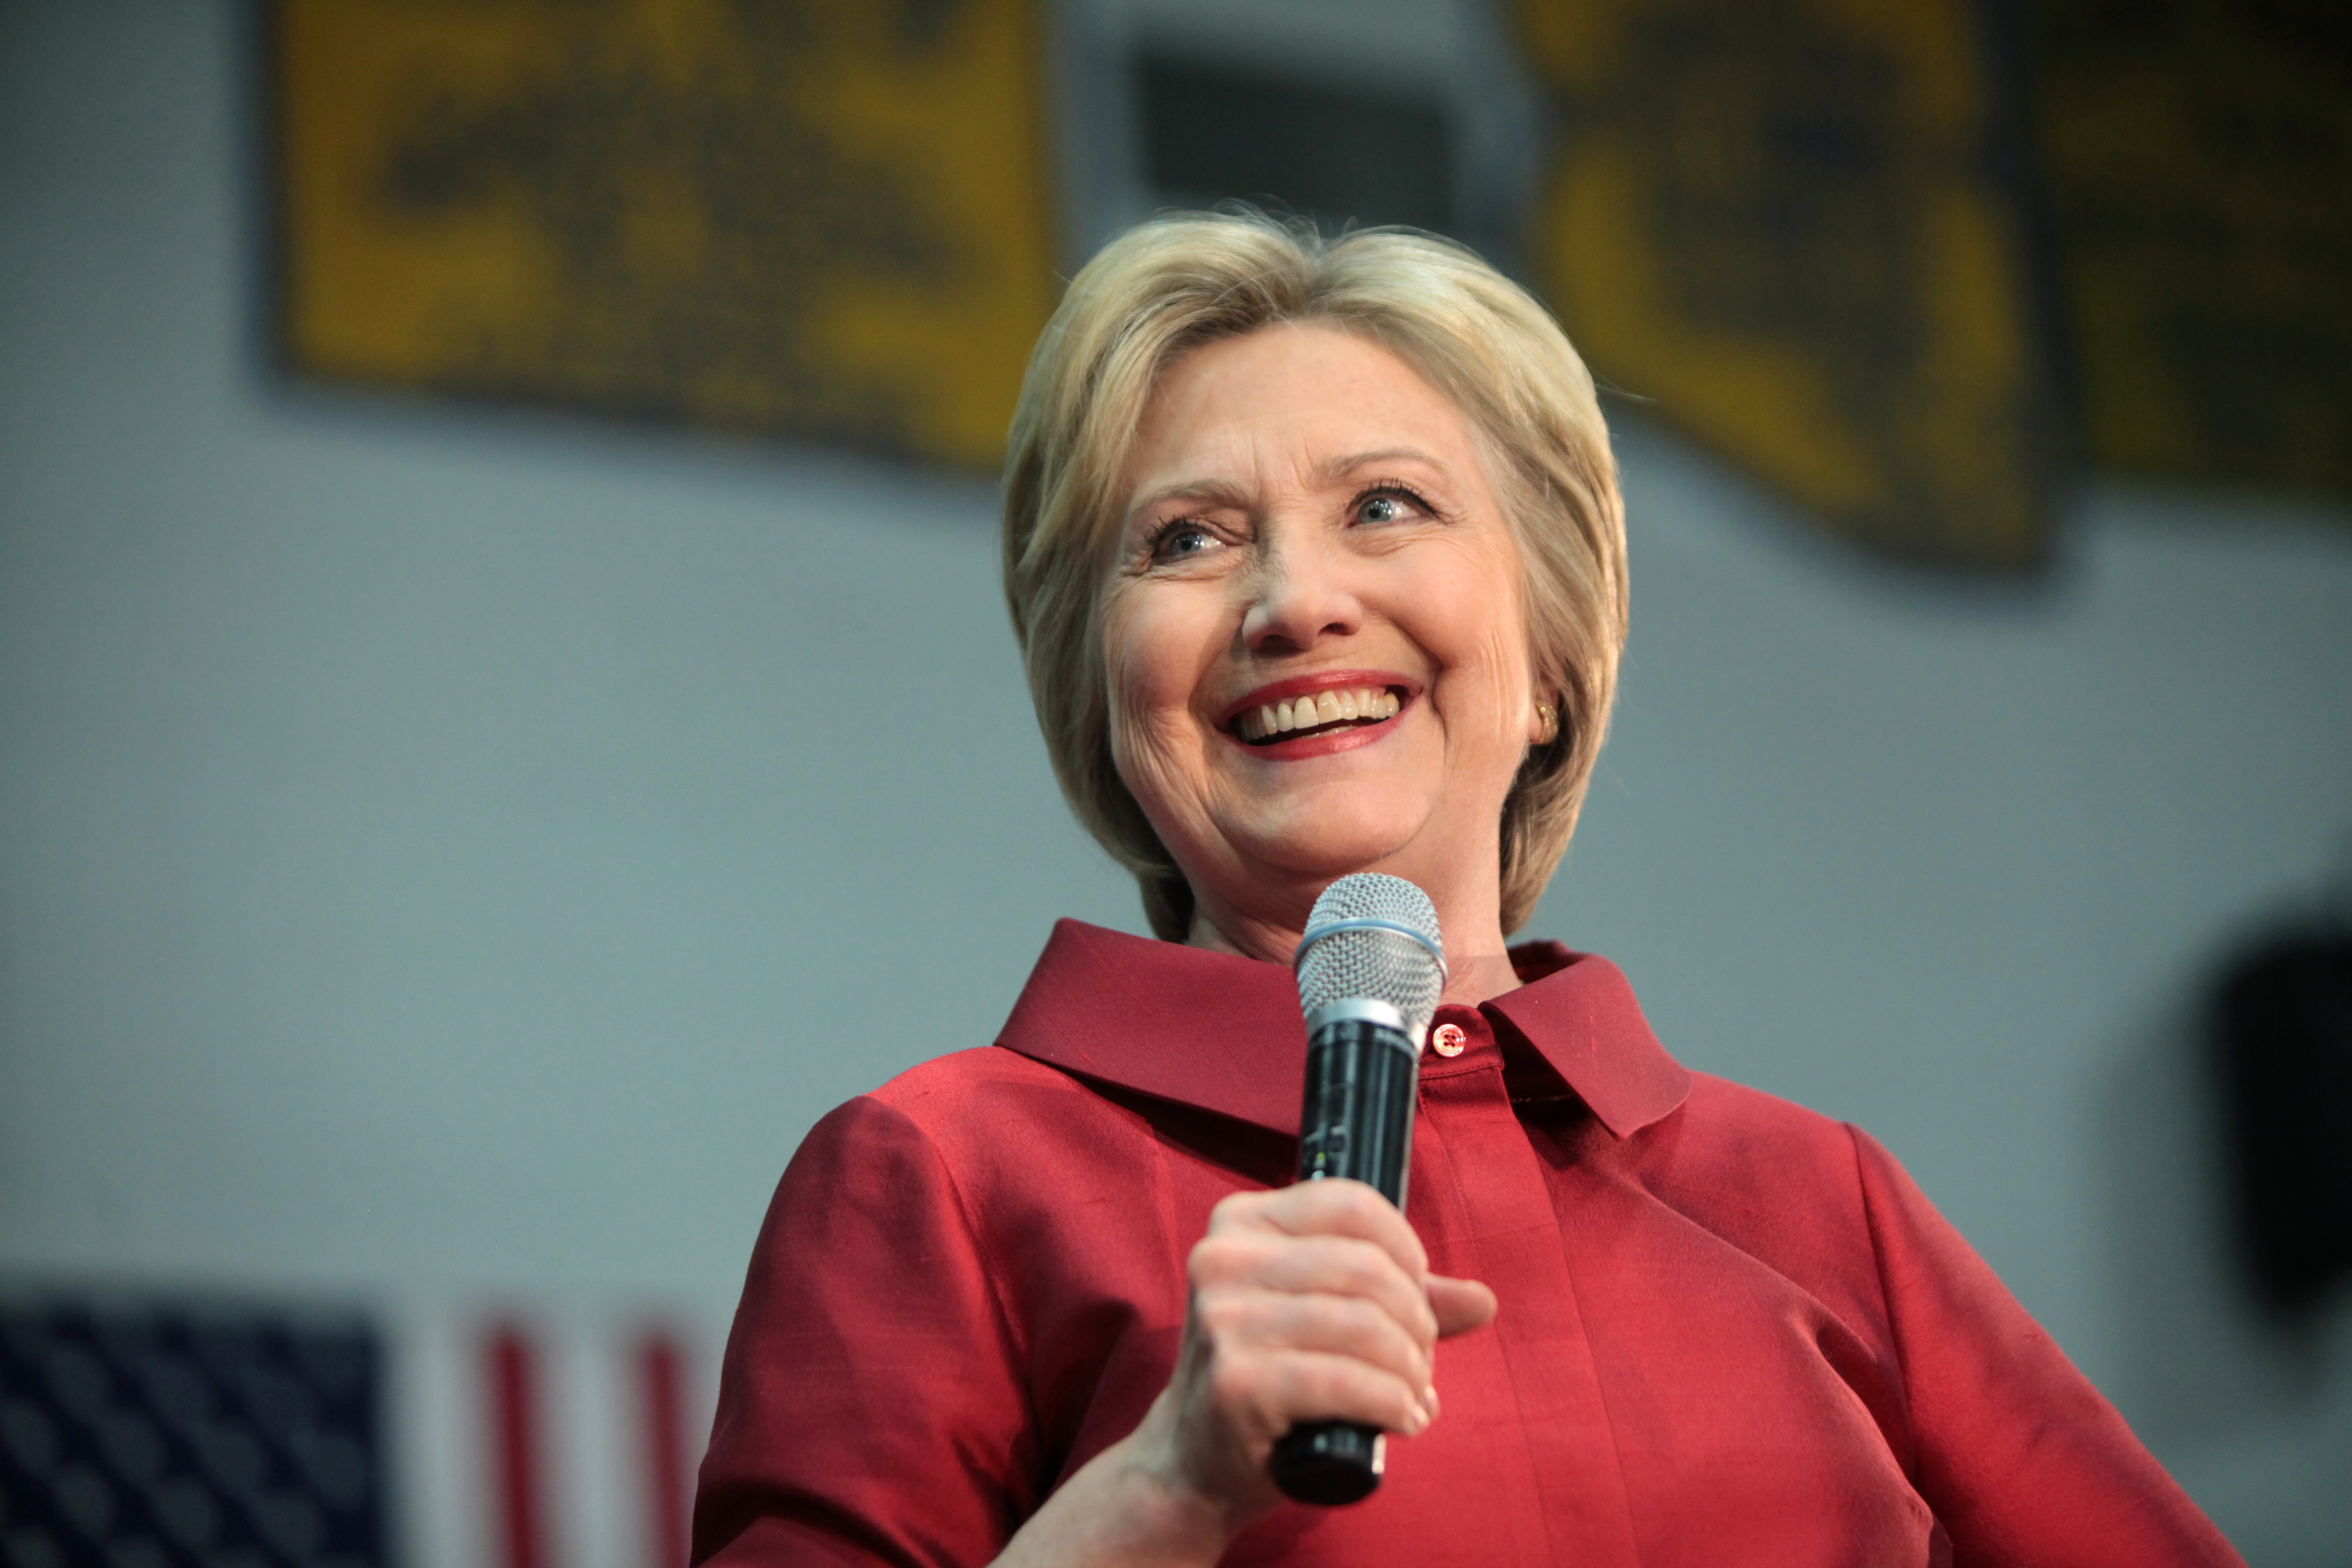 Independent Voters Shift To Hillary, Giving Her Five-Point Lead In Latest CNN Poll